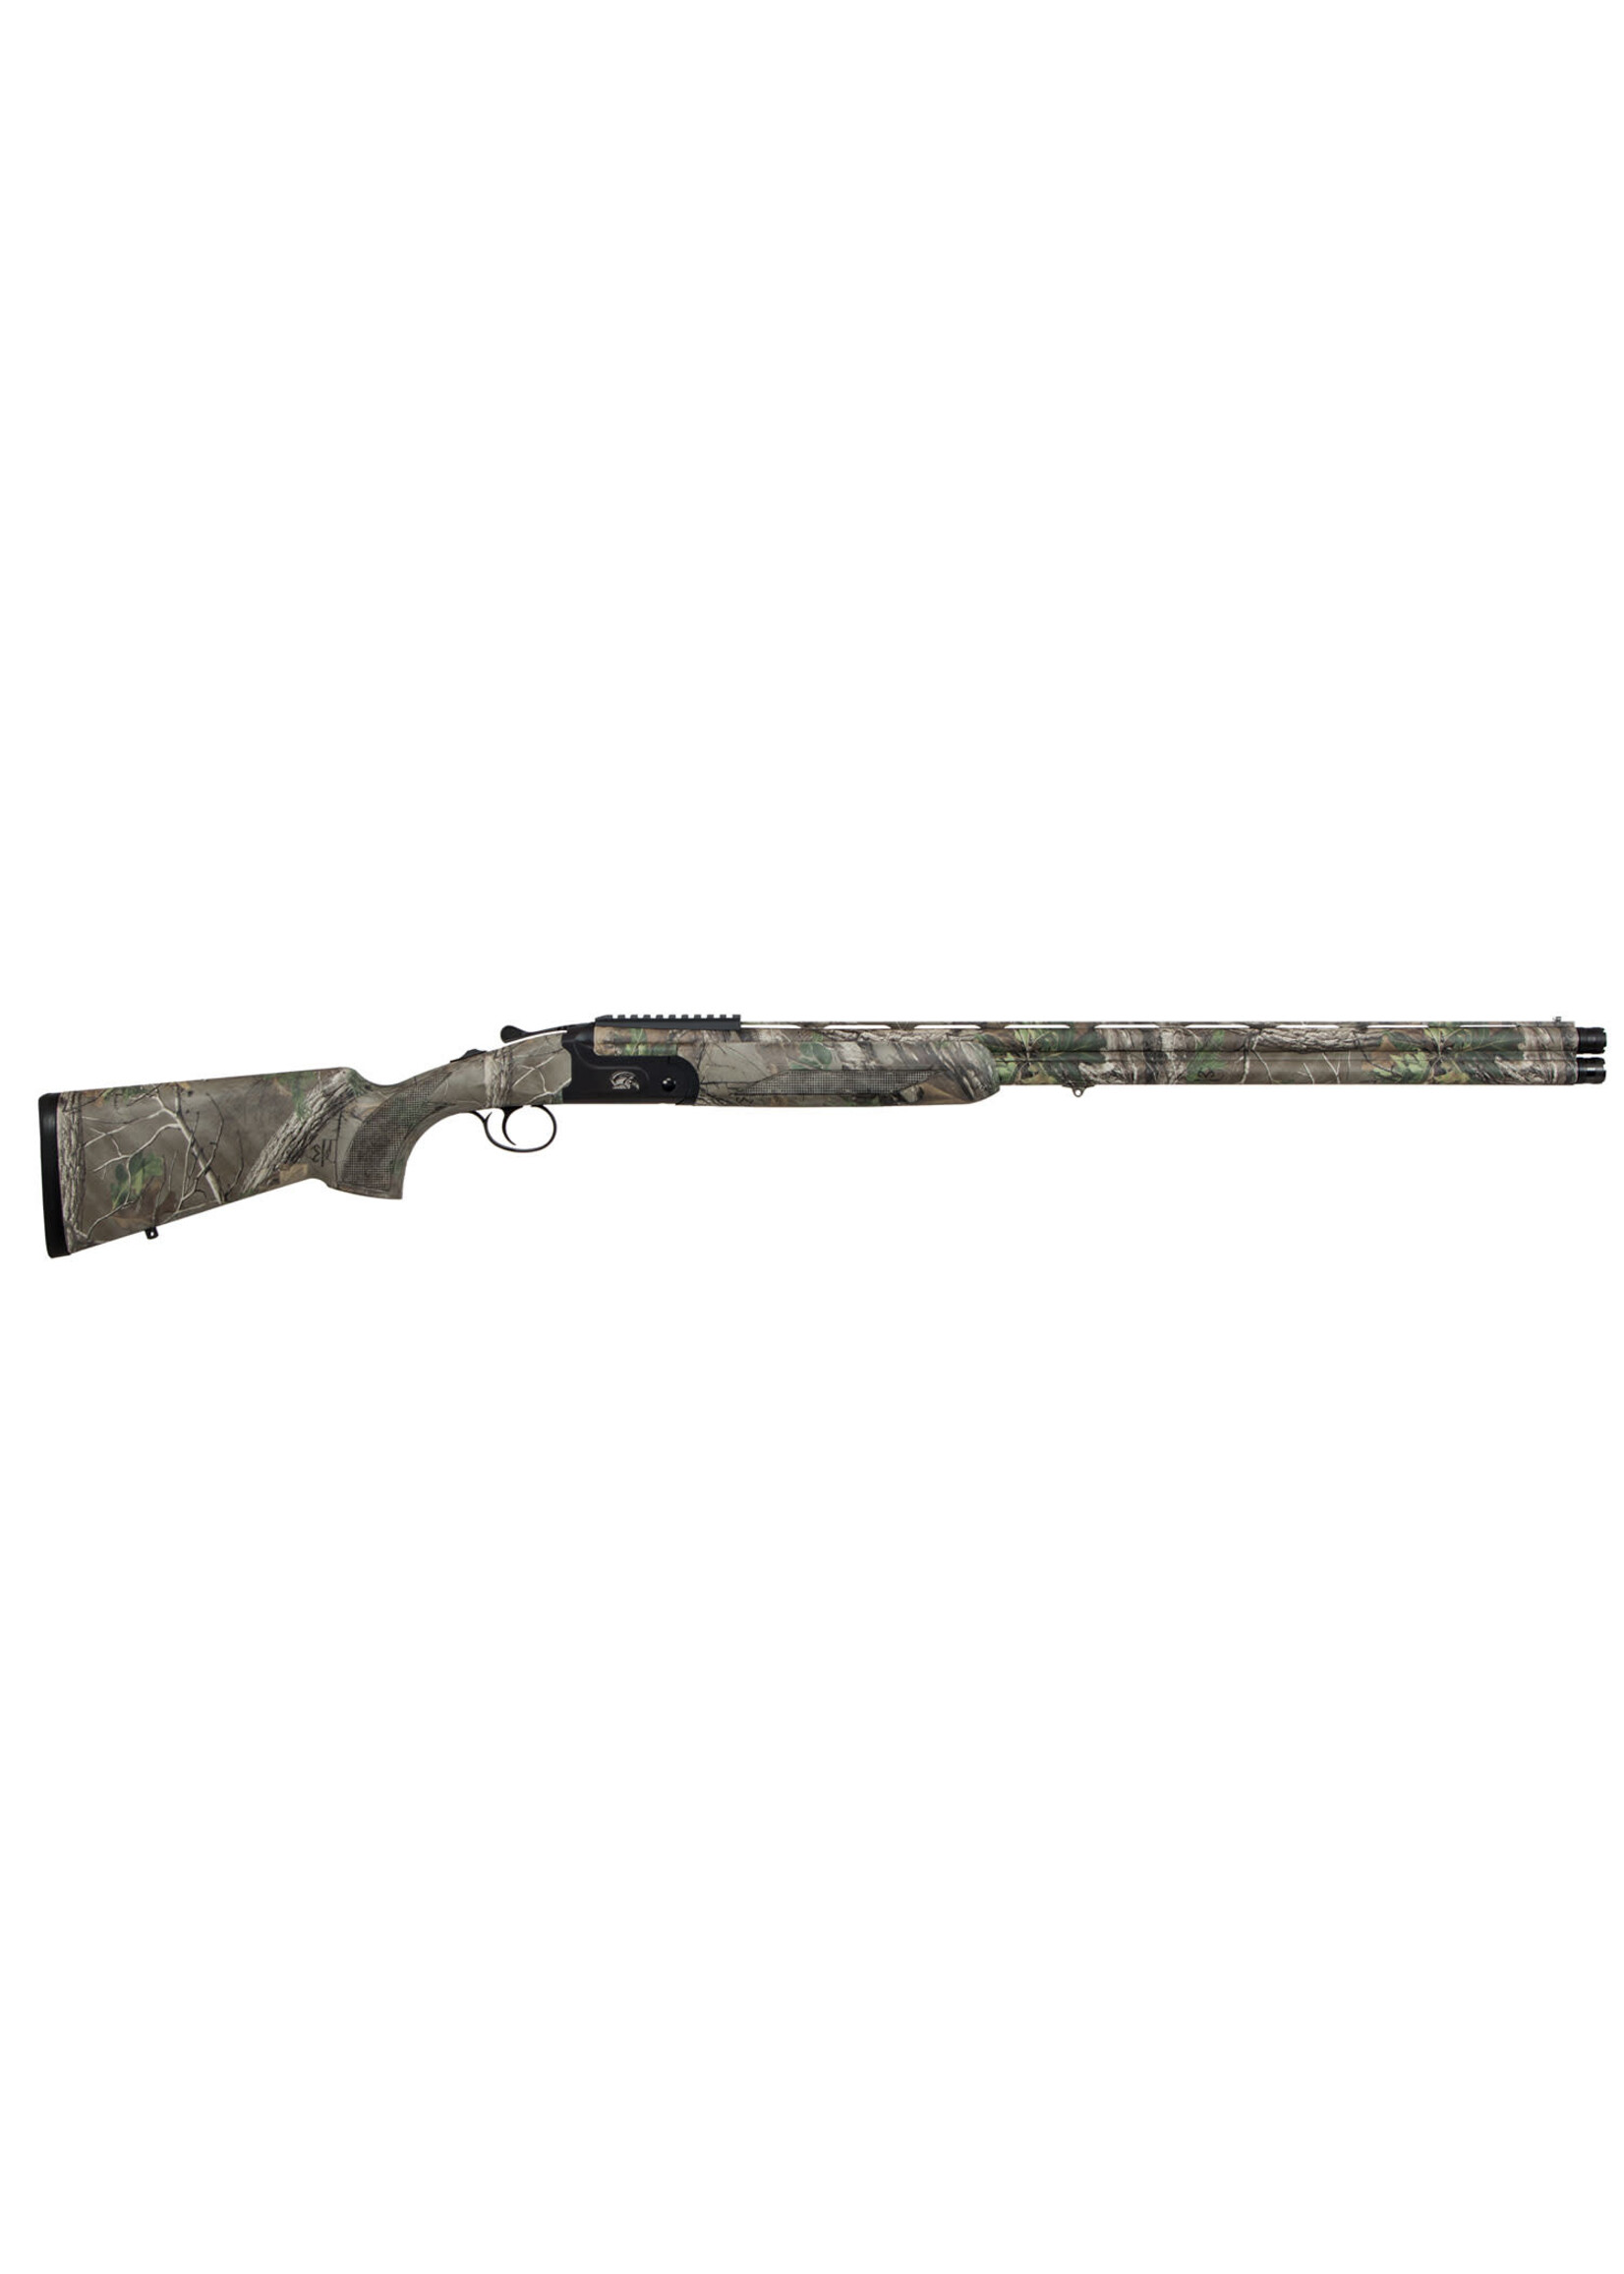 CZ USA CZ-USA 06588 Reaper Magnum 12 Gauge with 26" Realtree AP Green Barrel, 3.5" Chamber, 2rd Capacity, Black Metal Finish, Realtree AP Green Synthetic Stock & Picatinny Rail Right Hand (Full Size) Includes 5 Chokes